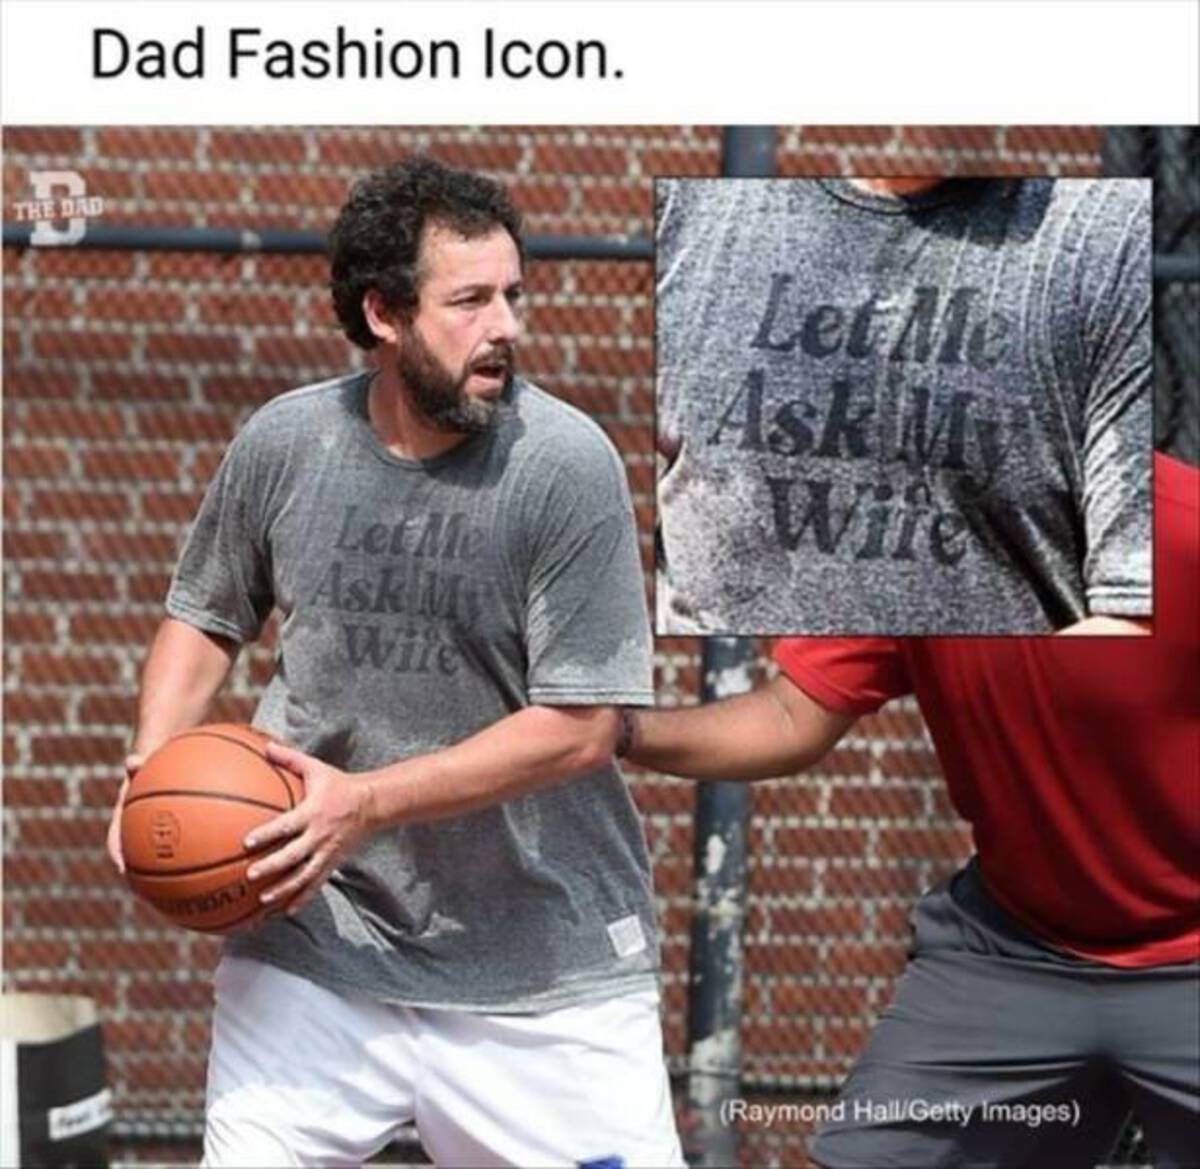 adam sandler playing basketball - Dad Fashion Icon. The Dad m Let Me Ask M Wile Let Me Ask My Wife Raymond HallGetty Images